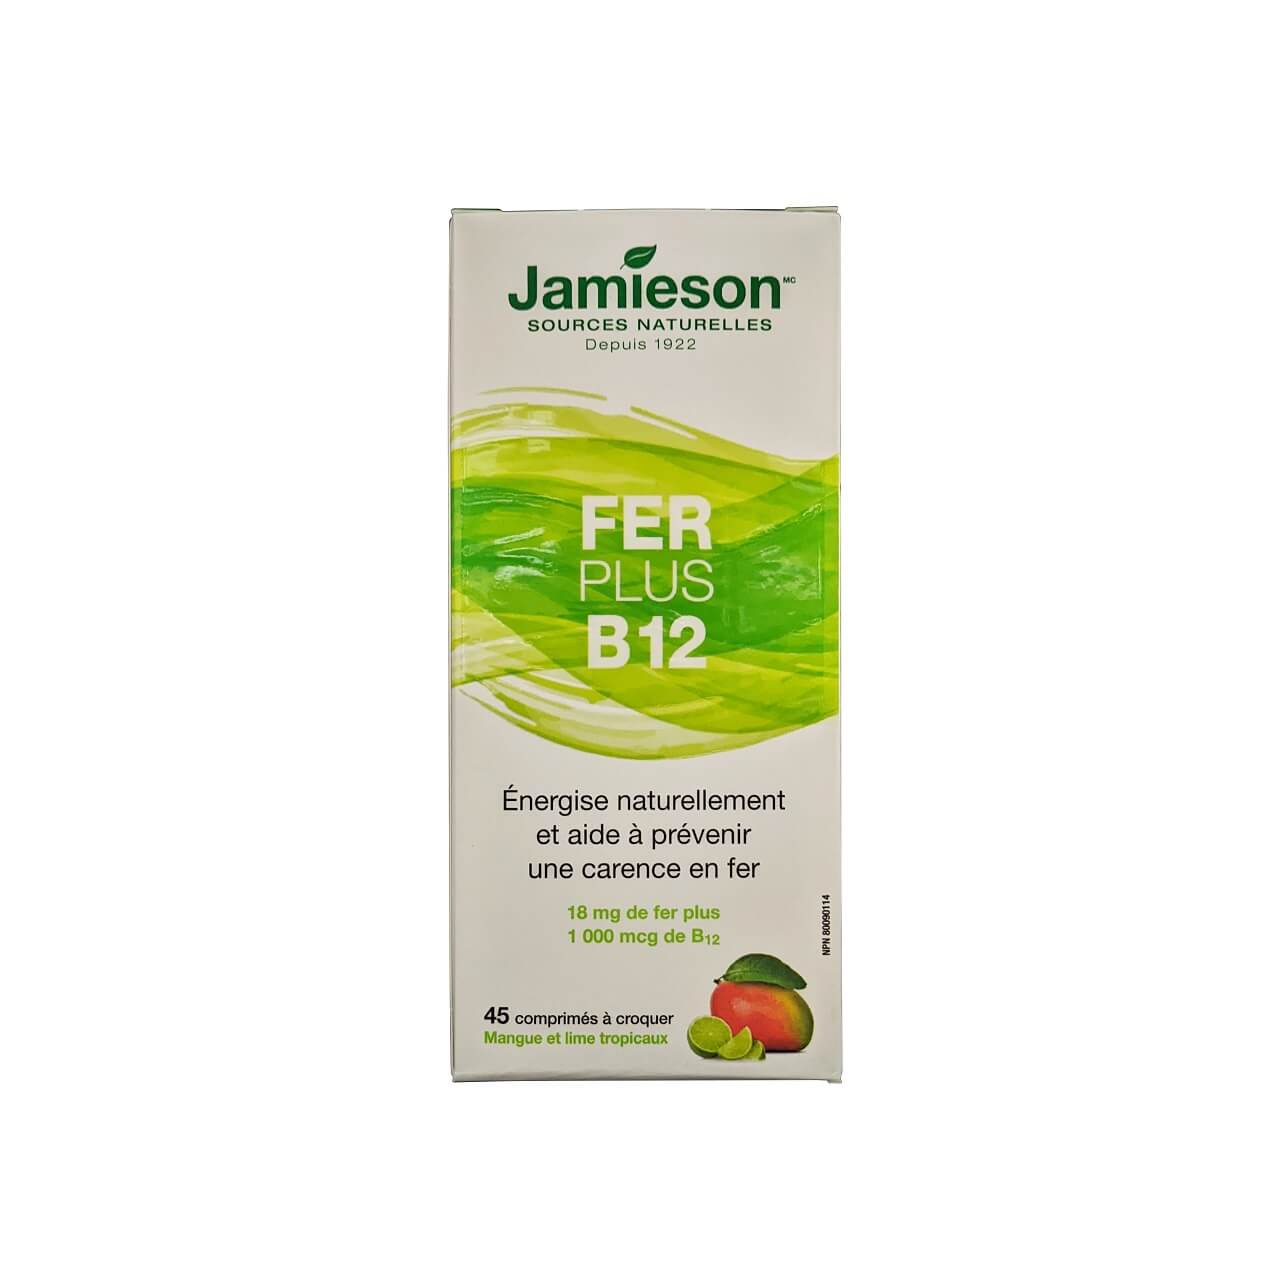 Product label for Jamieson Iron Plus B12 Topical Mango Lime Flavour (45 chewables tablets) in French